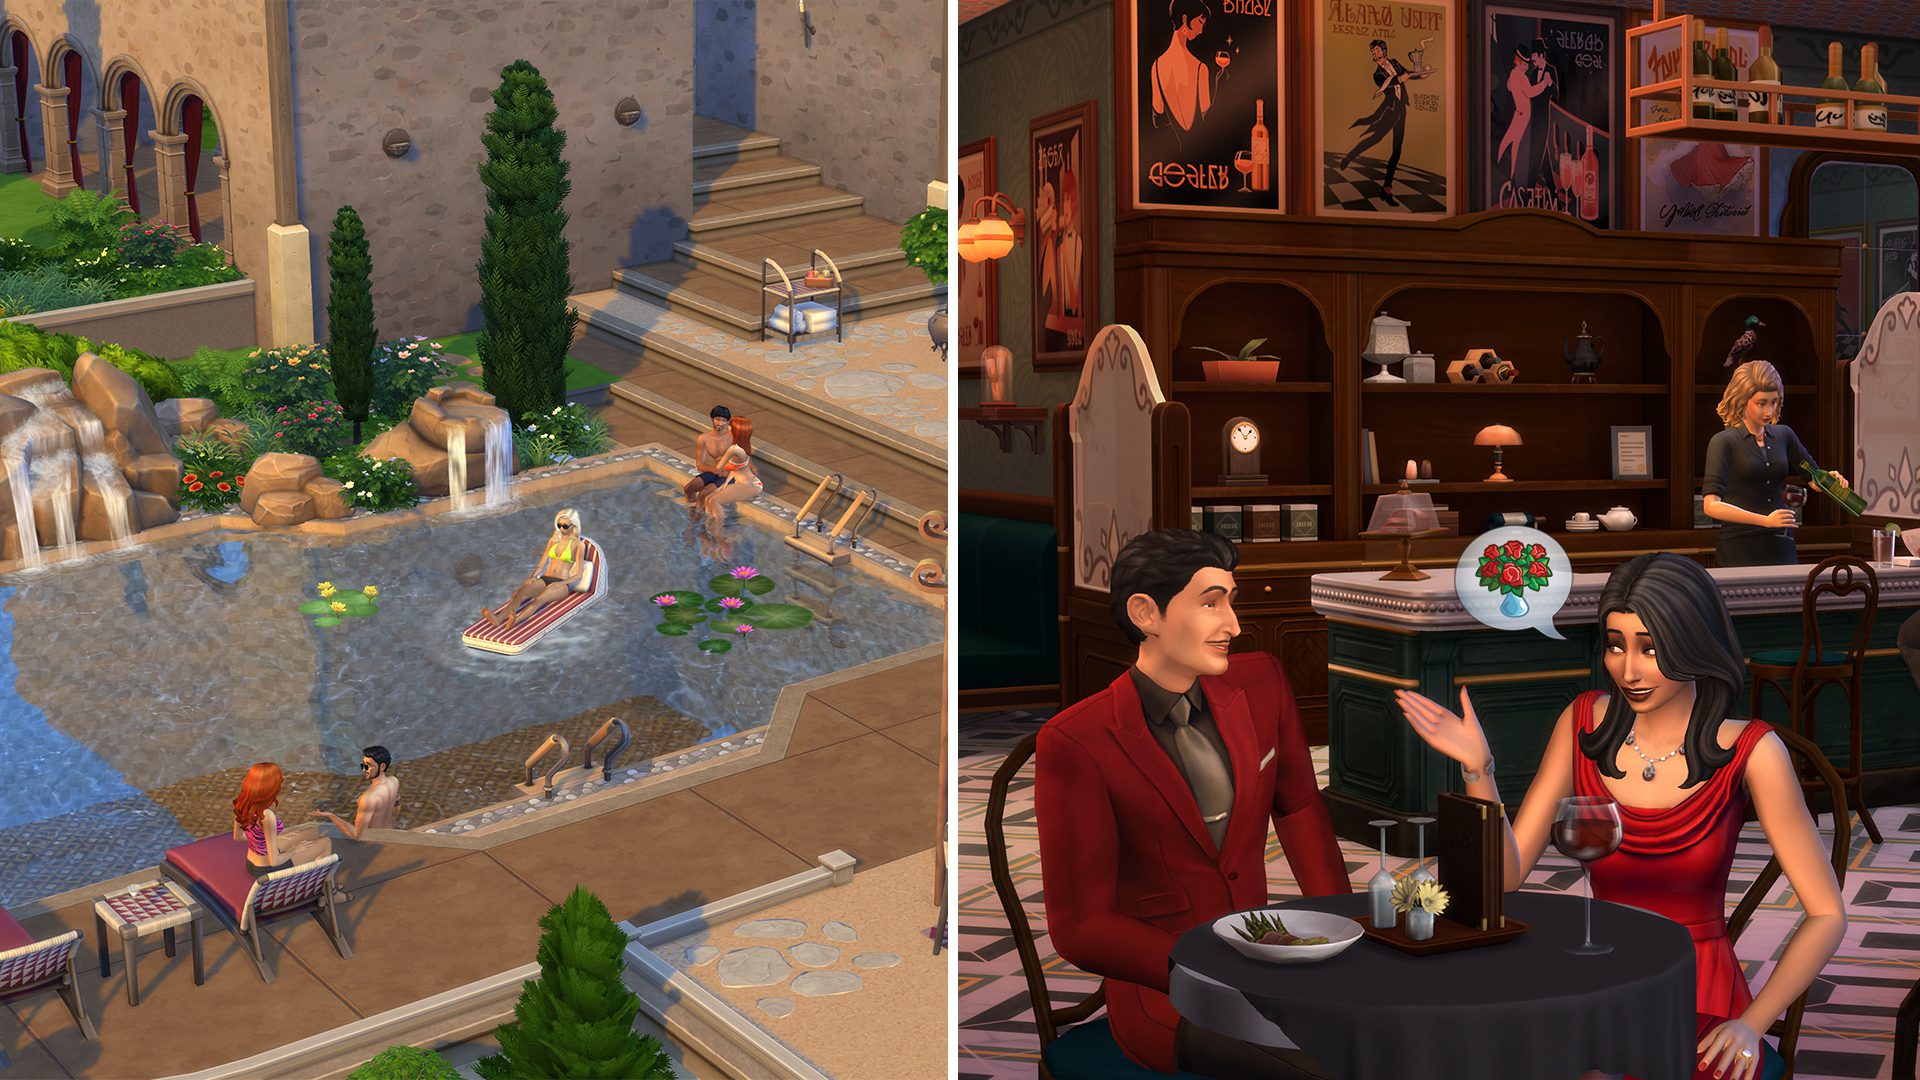 Two new kits for The Sims 4 arrive tomorrow, focused on relaxing vacations and cozy meals